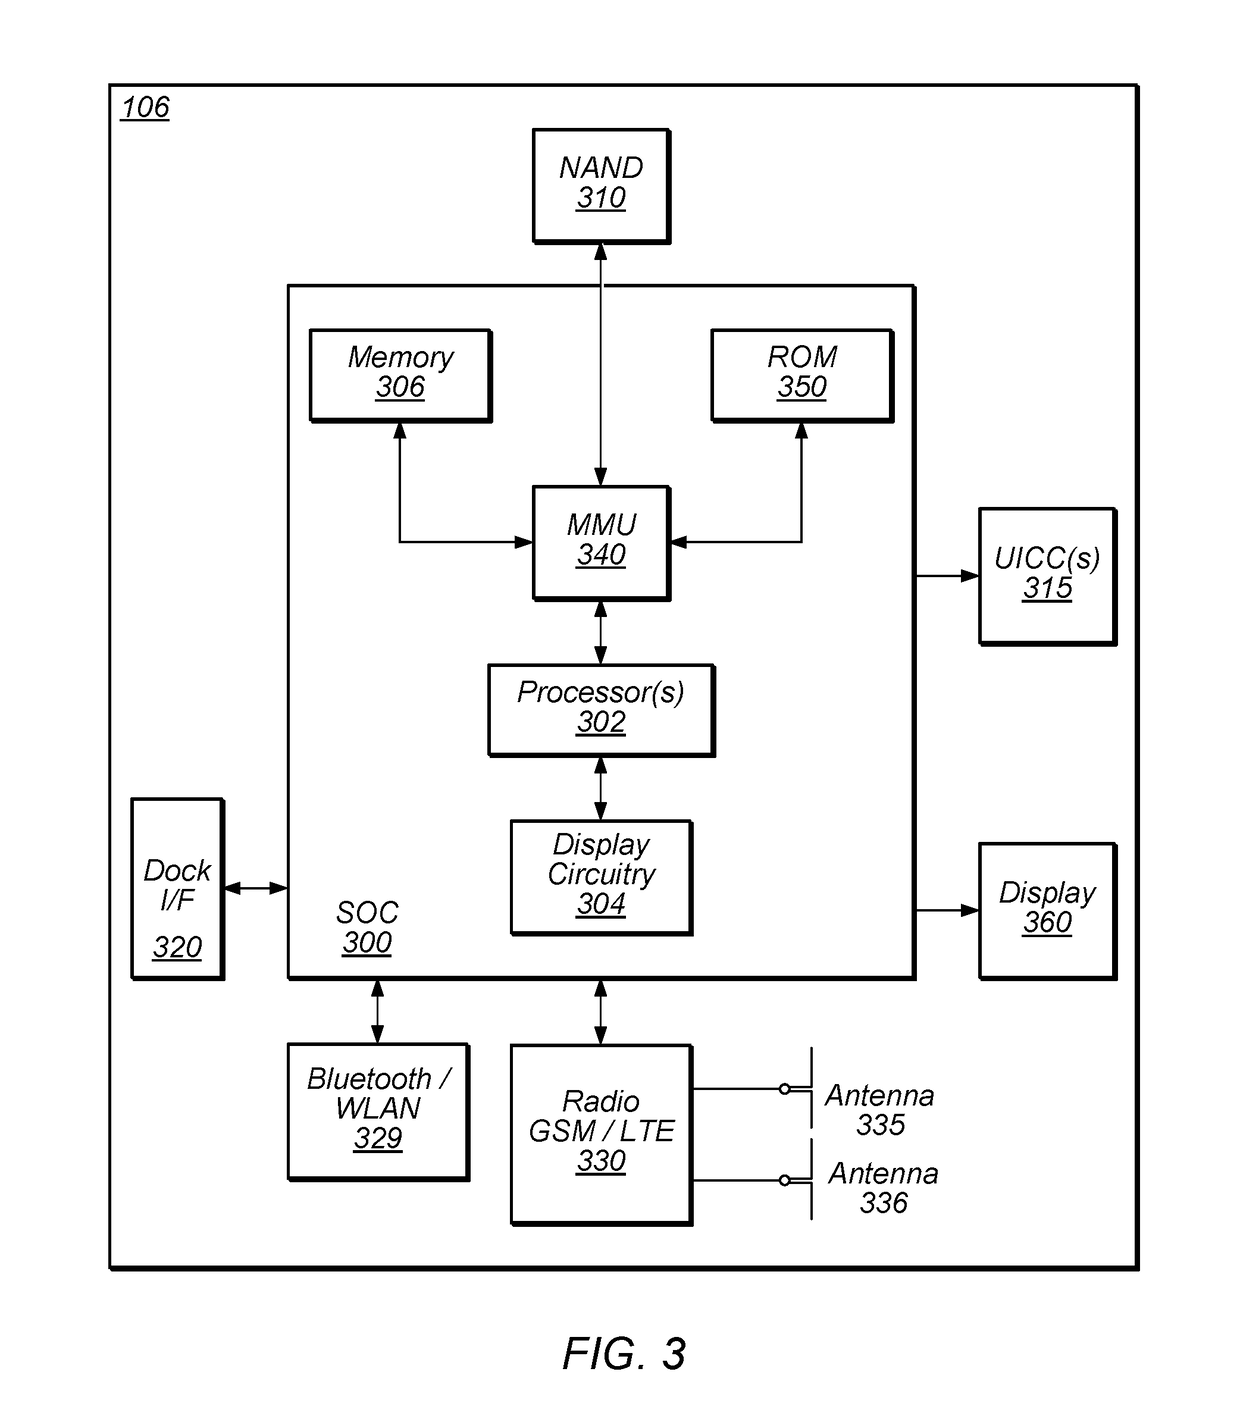 Apparatus, system, and method for radio interface selection for IMS connection based on power considerations